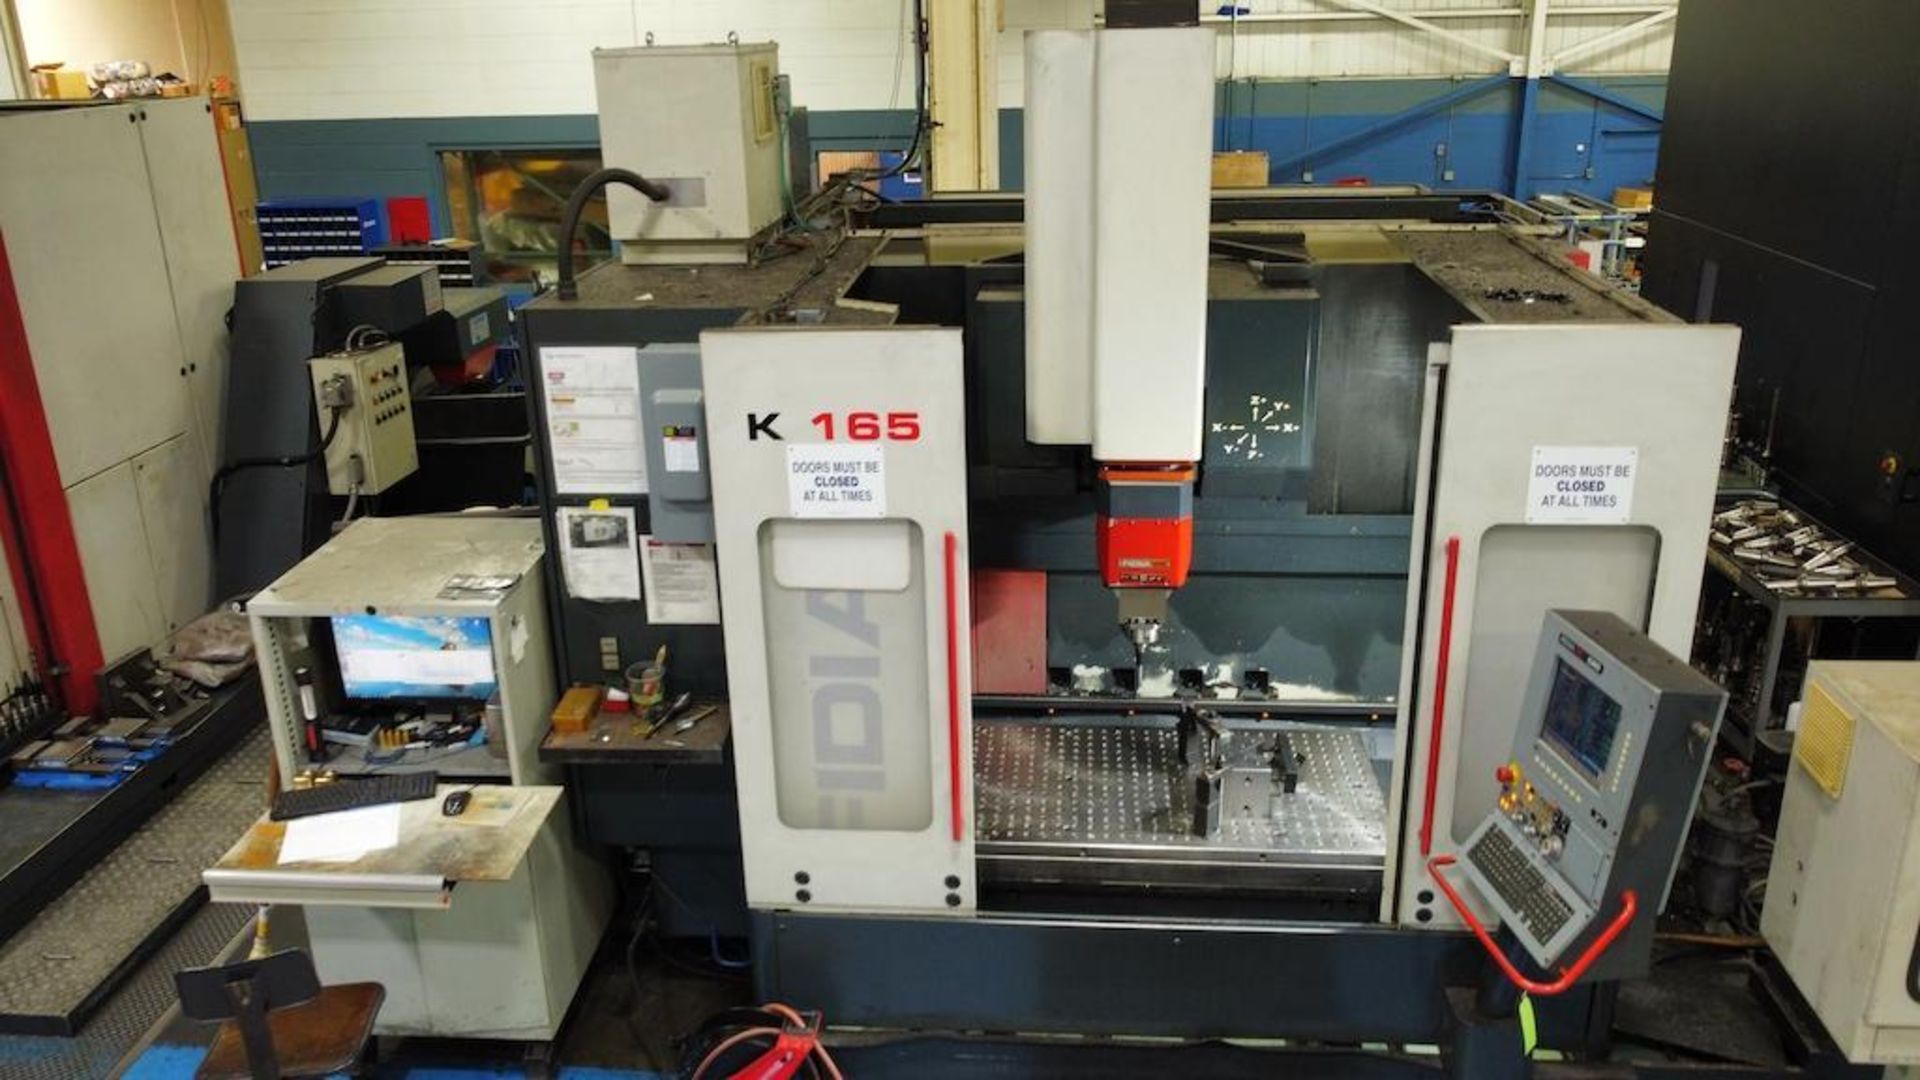 Fidia K165/BHS 3 + 2 High Speed CNC Vertical Machining Center, Fidia C20 CNC Control, Travels X-39.3 - Image 17 of 17